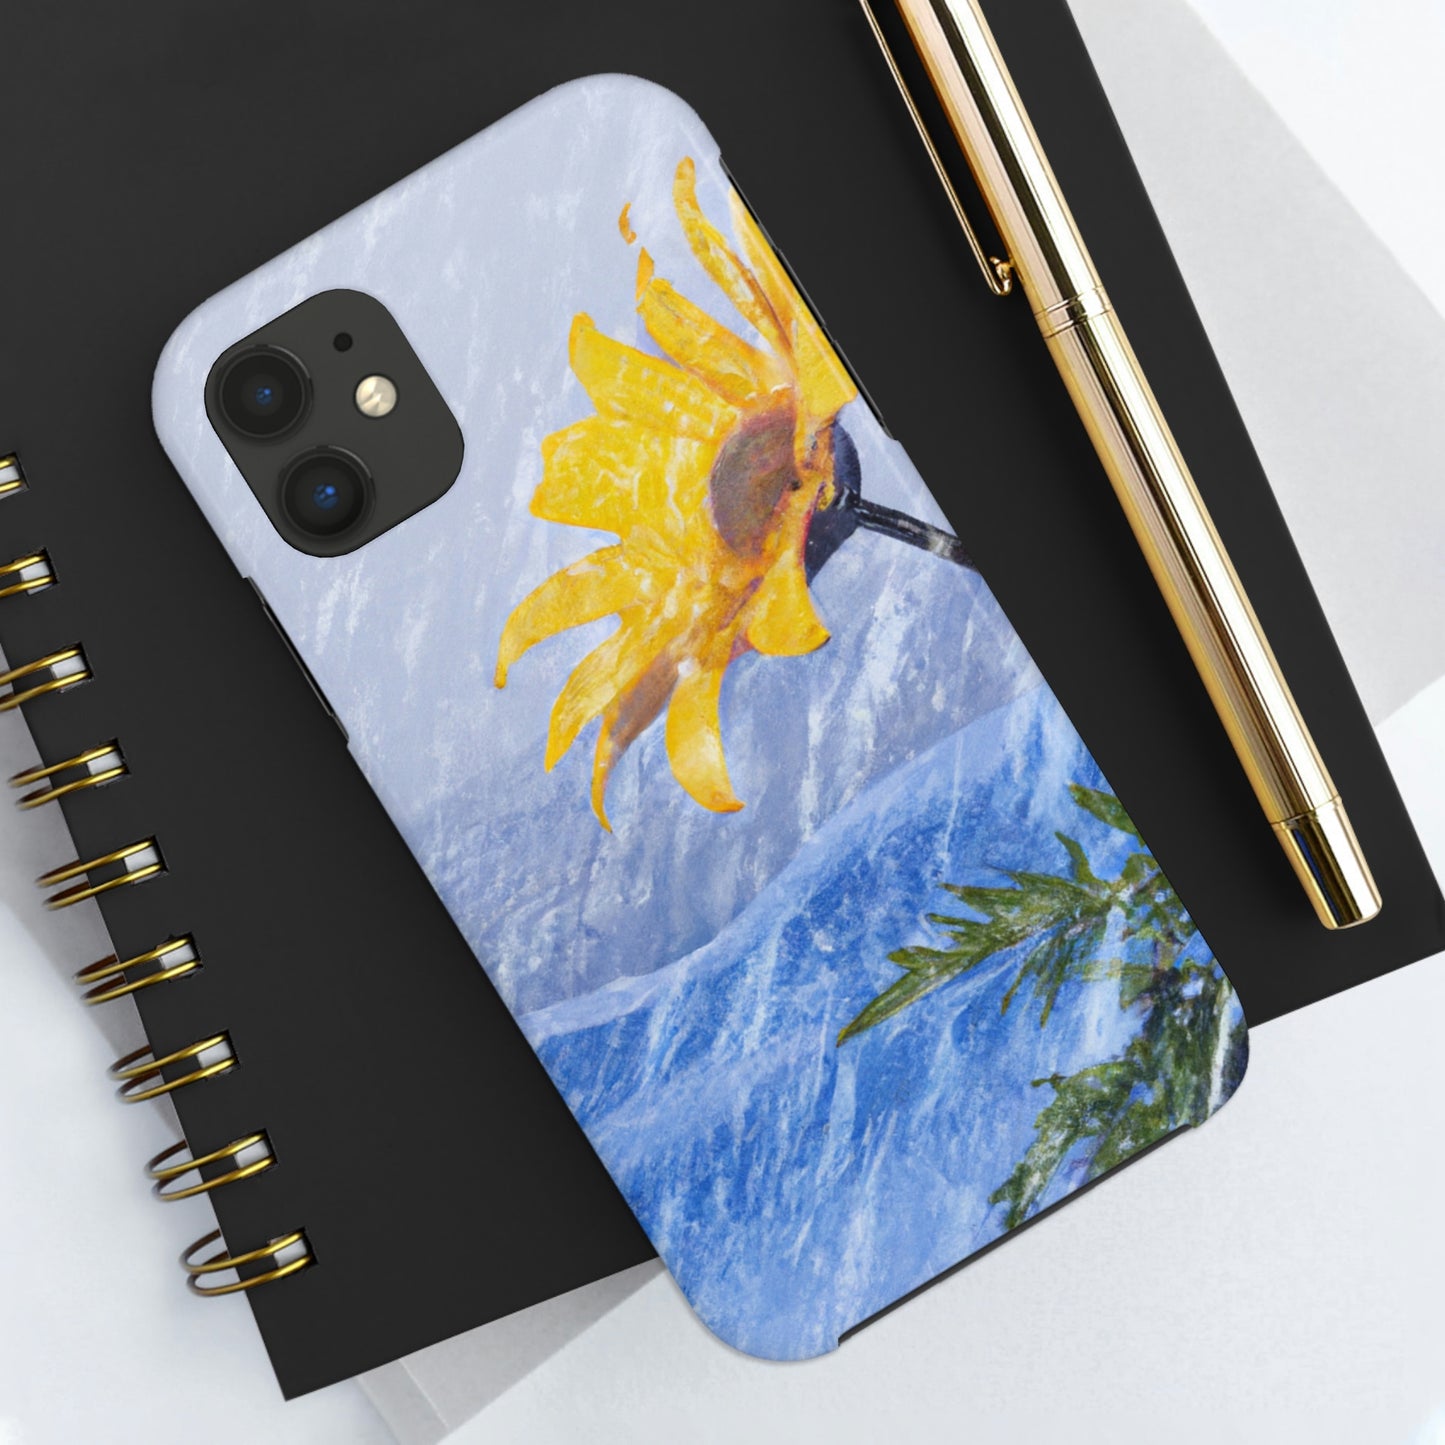 "A Burst of Color in the Glistening White: The Miracle of a Flower Blooms in a Snowstorm" - The Alien Tough Phone Cases